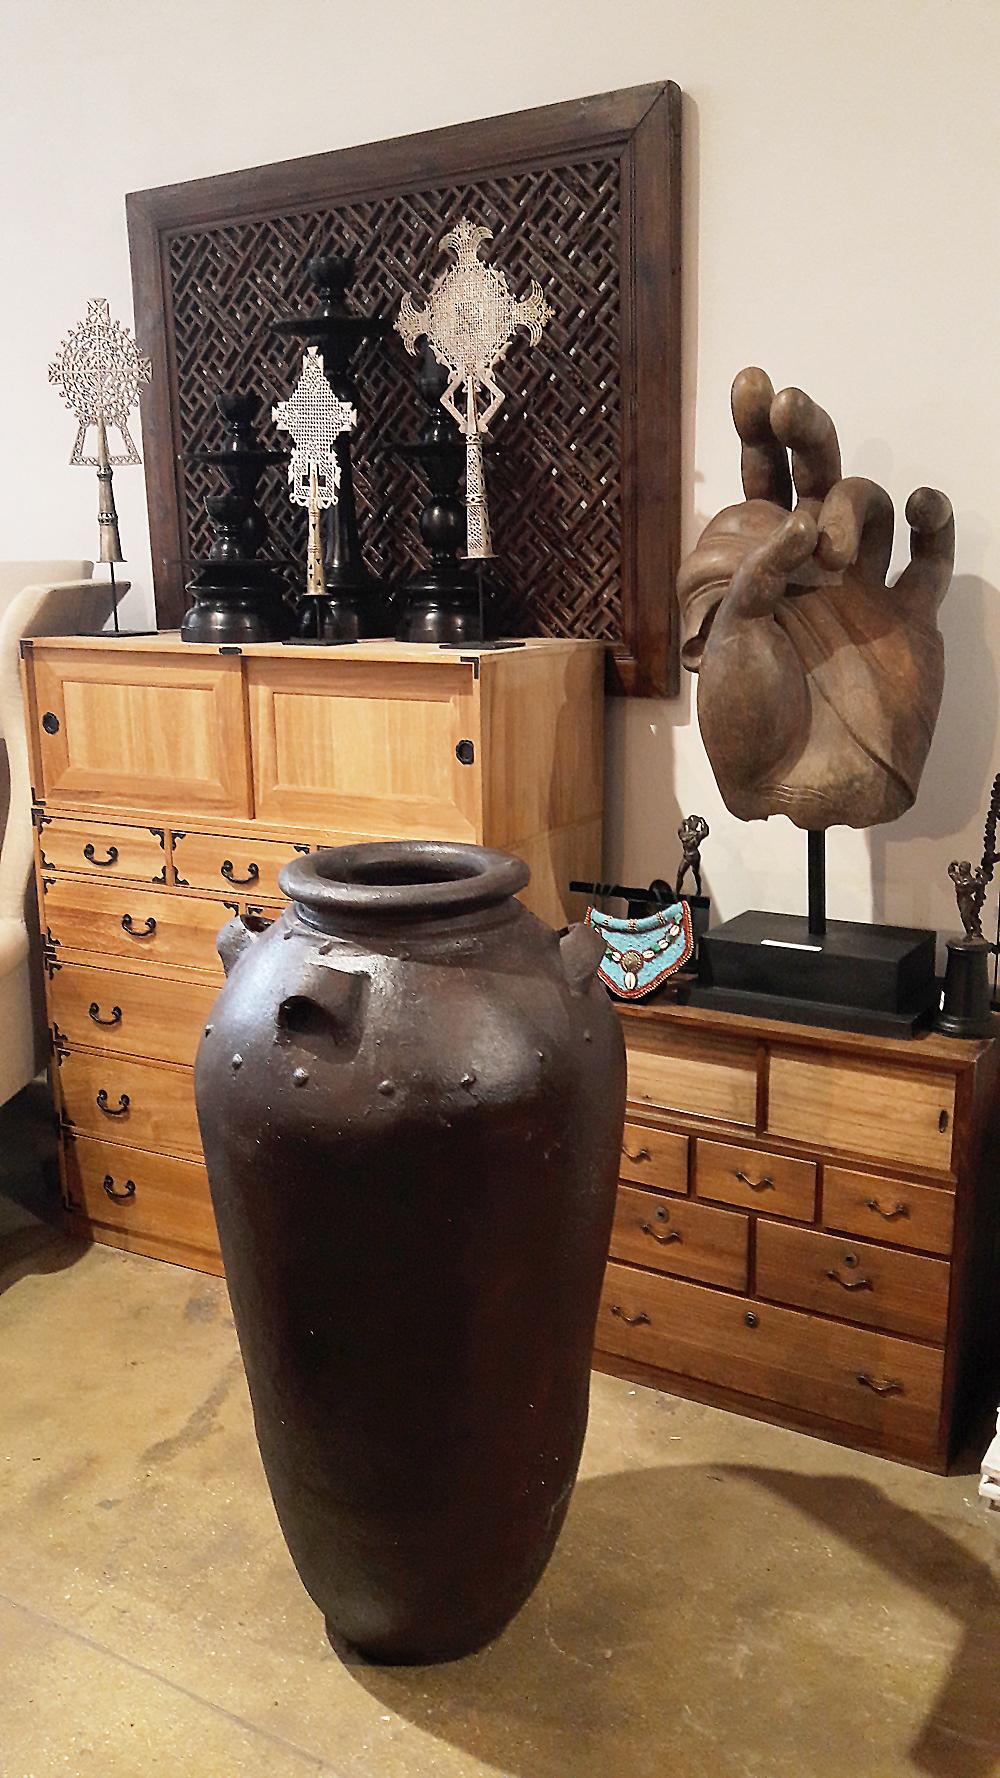 Contemporary Tall Clay Jar from Indonesia